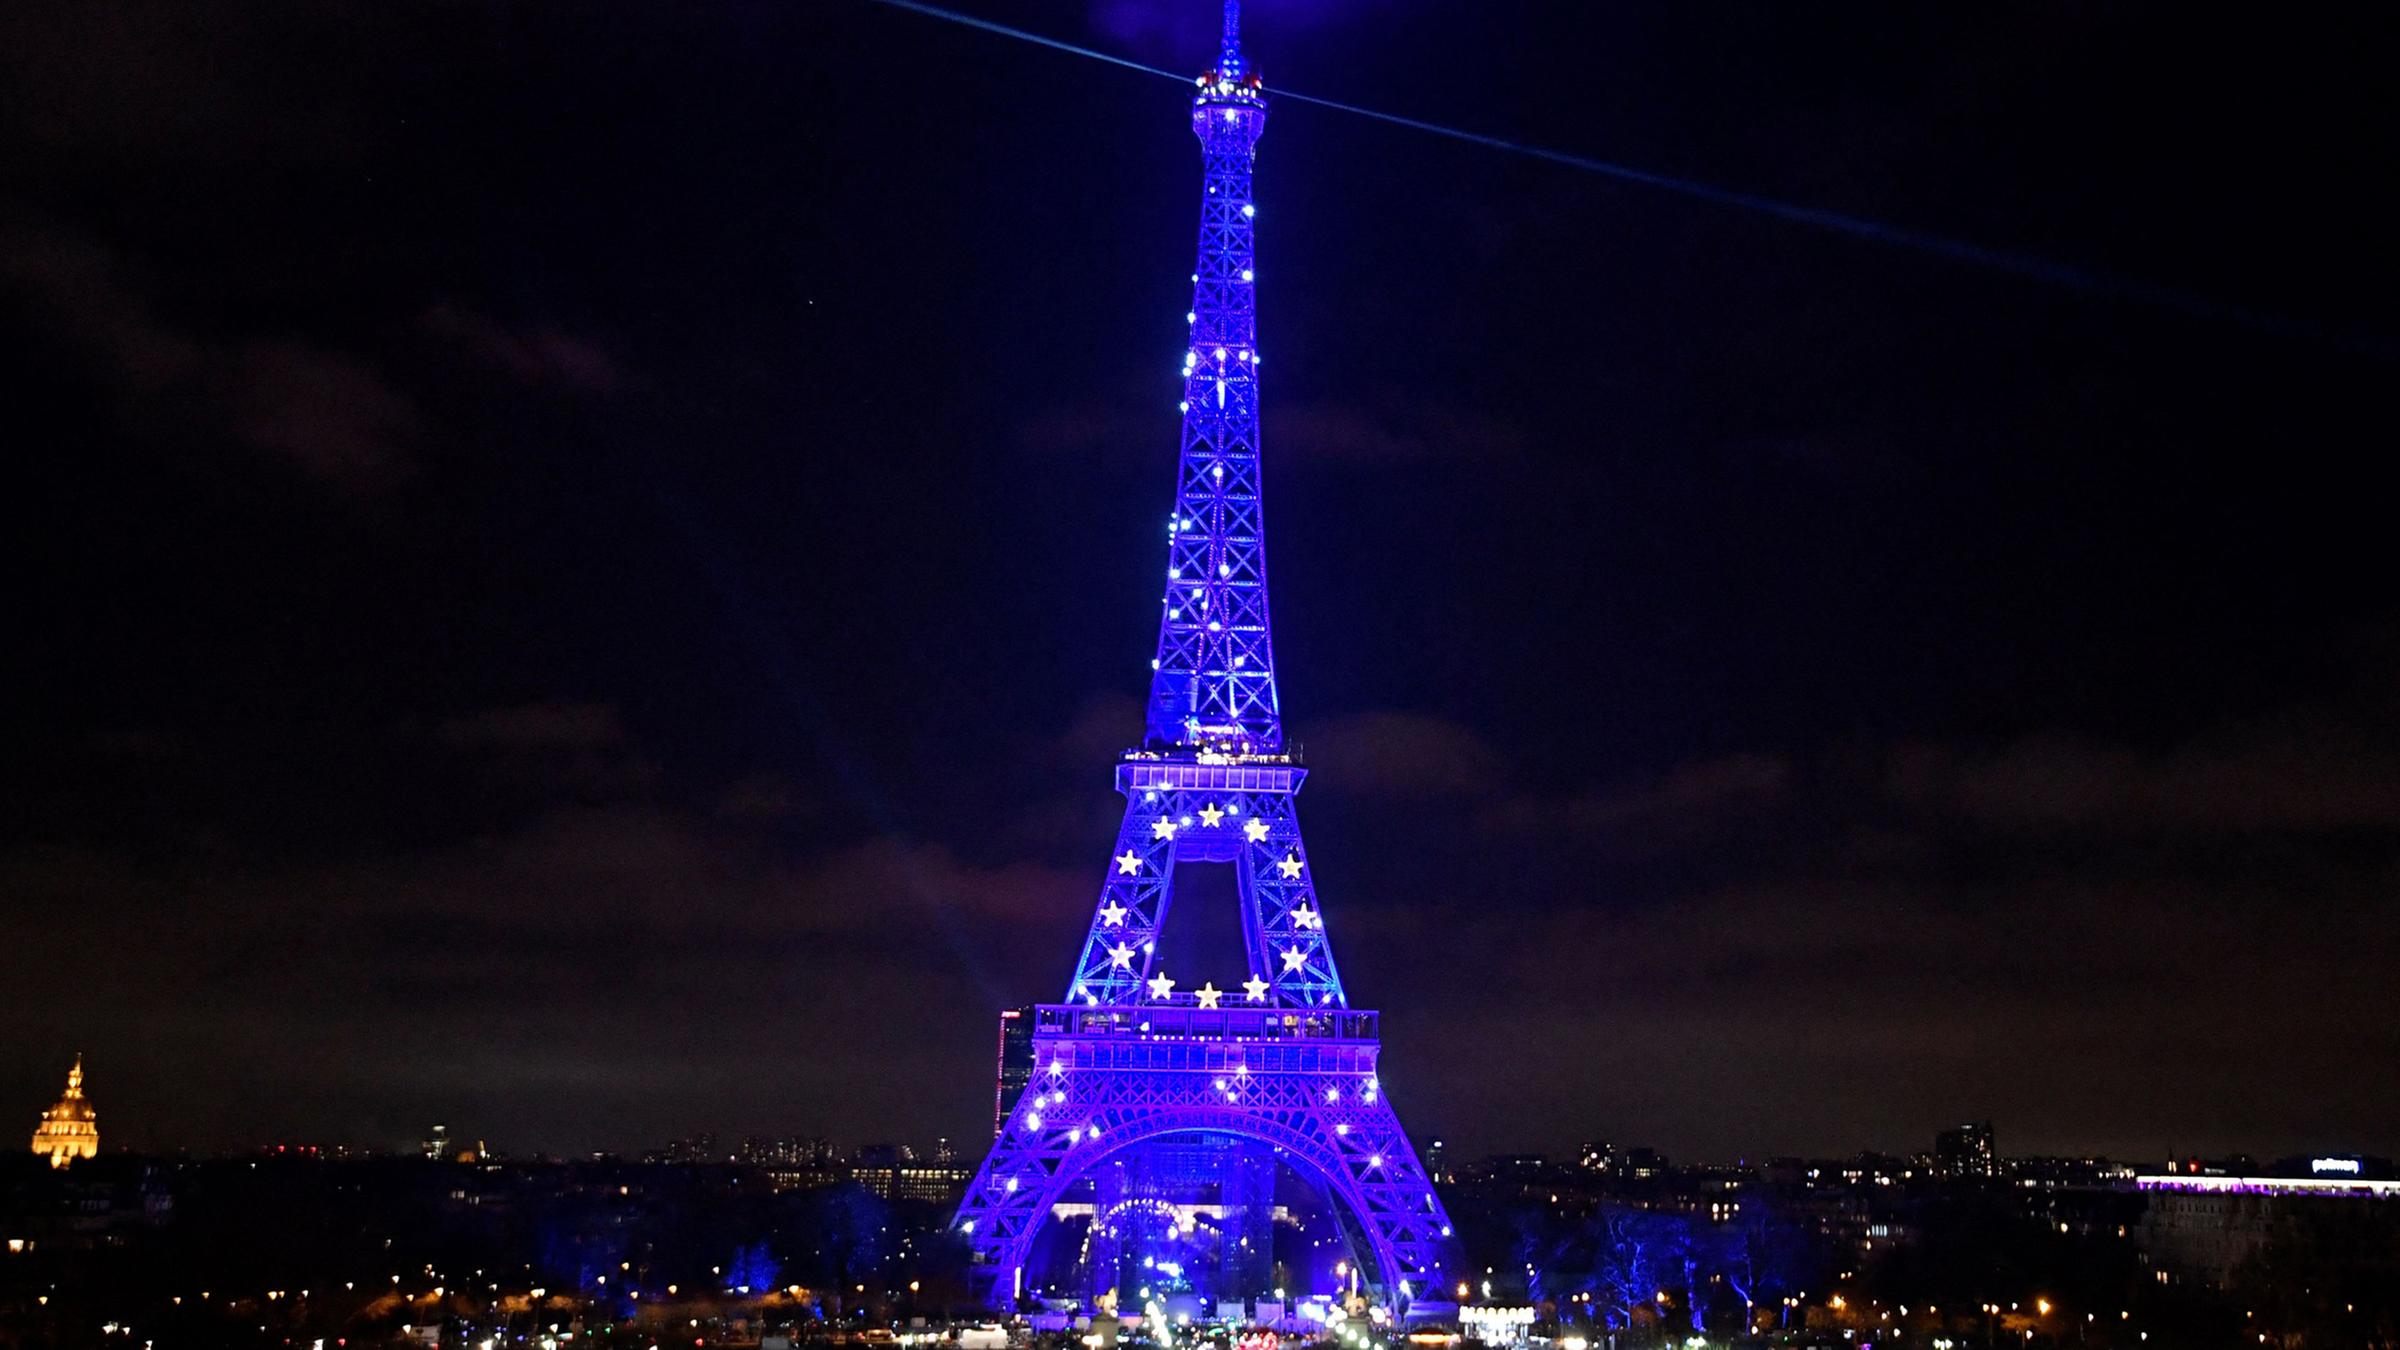 The Eiffel Tower lights up blue on New Year's Eve to celebrate France's Presidency of the Council of the European Union.